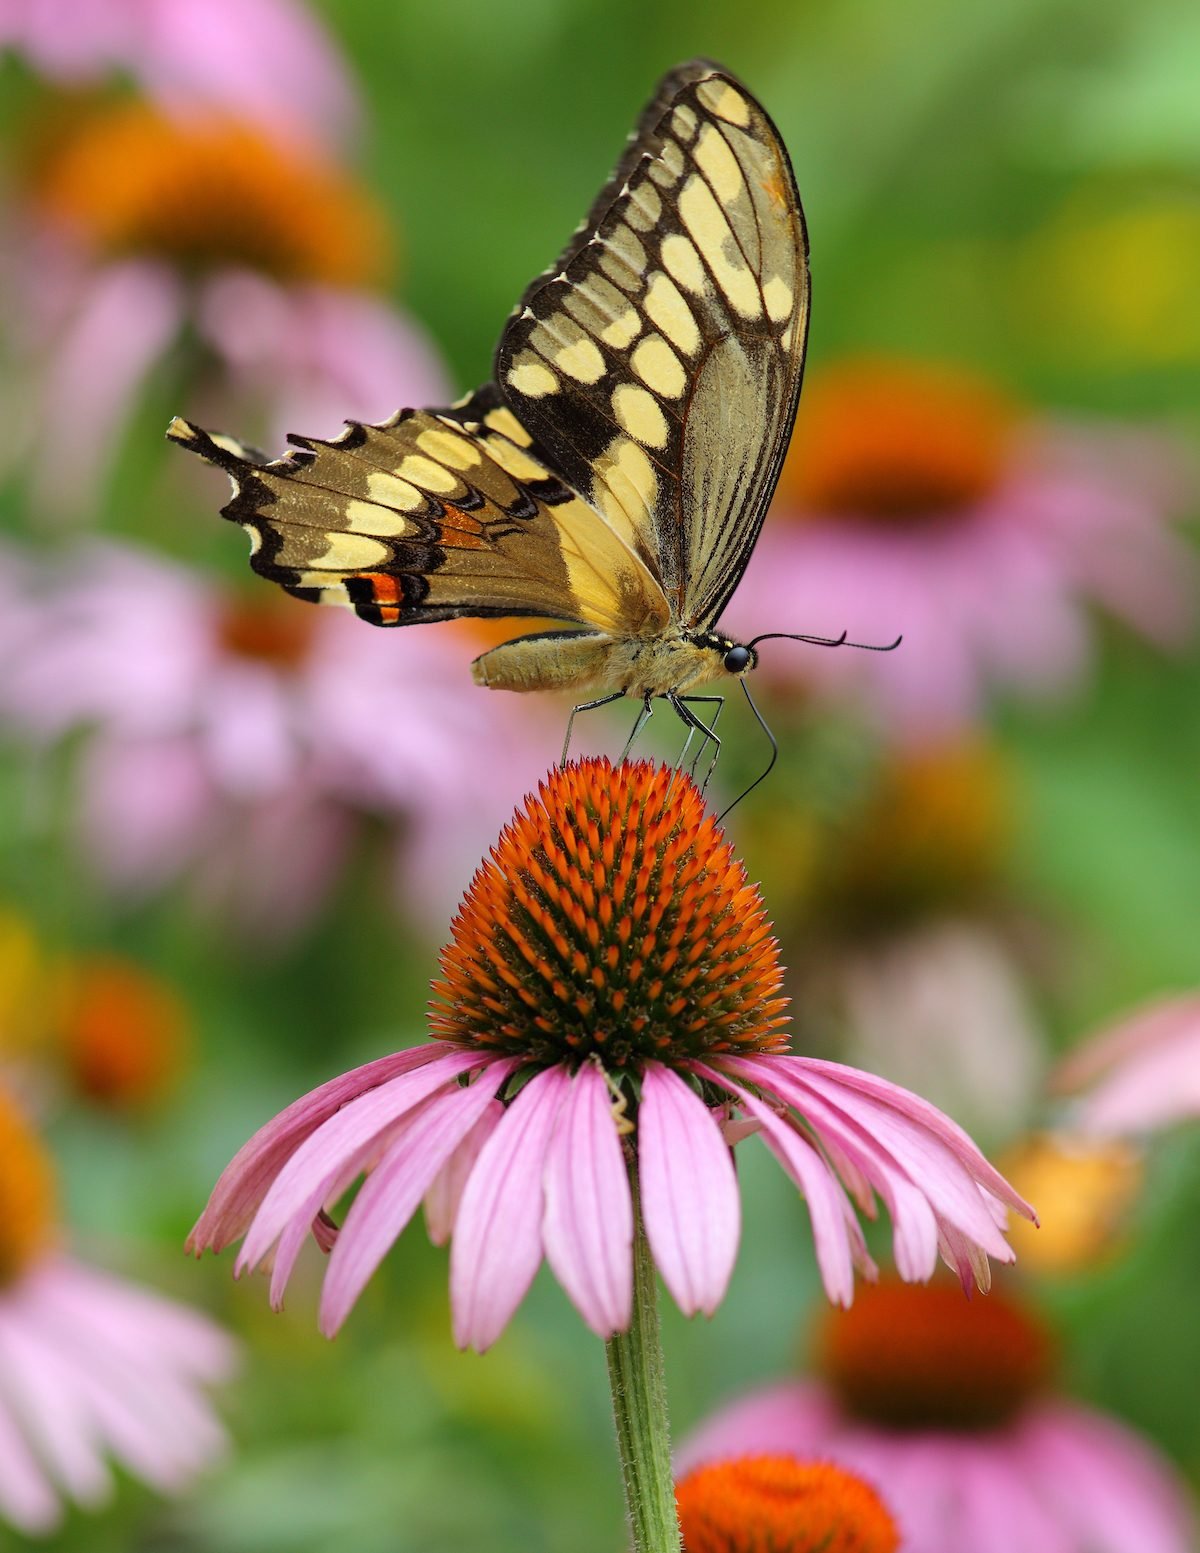 Eastern tiger swallowtail butterfly can be found across region